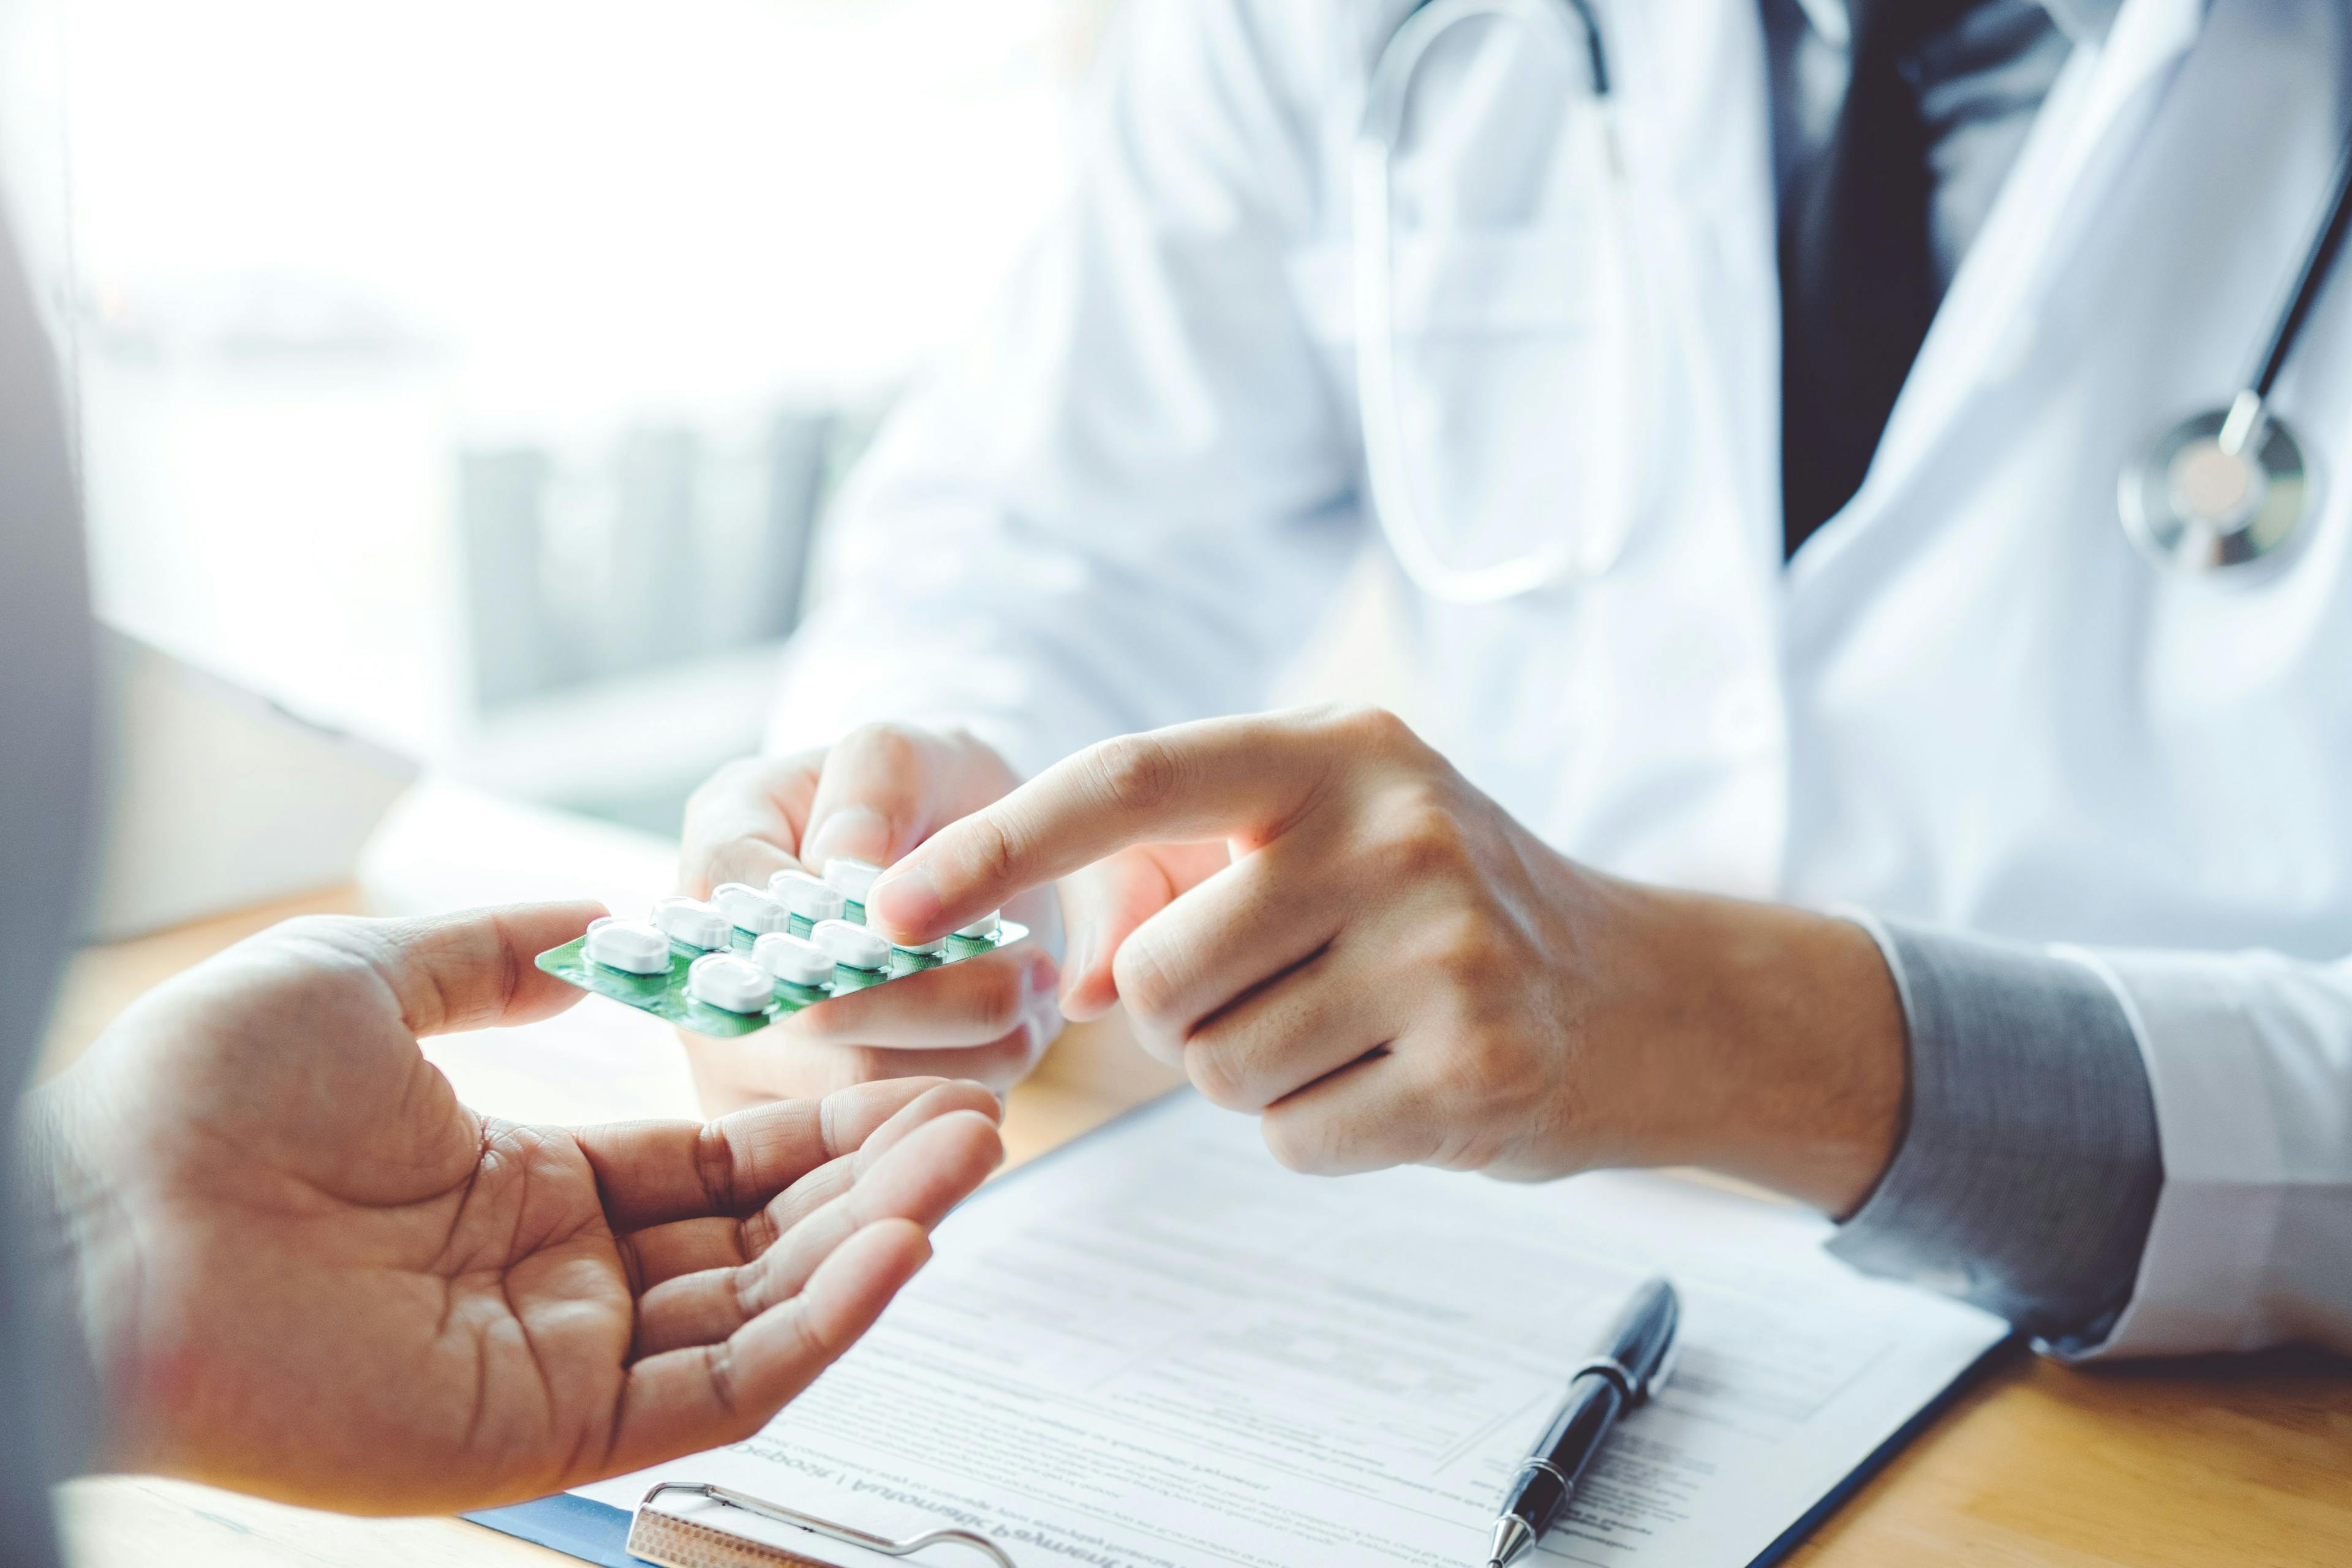 Doctor or physician recommend pills medical prescription to male Patient hospital and medicine concept | Image Credit: joyfotoliakid - stock.adobe.com